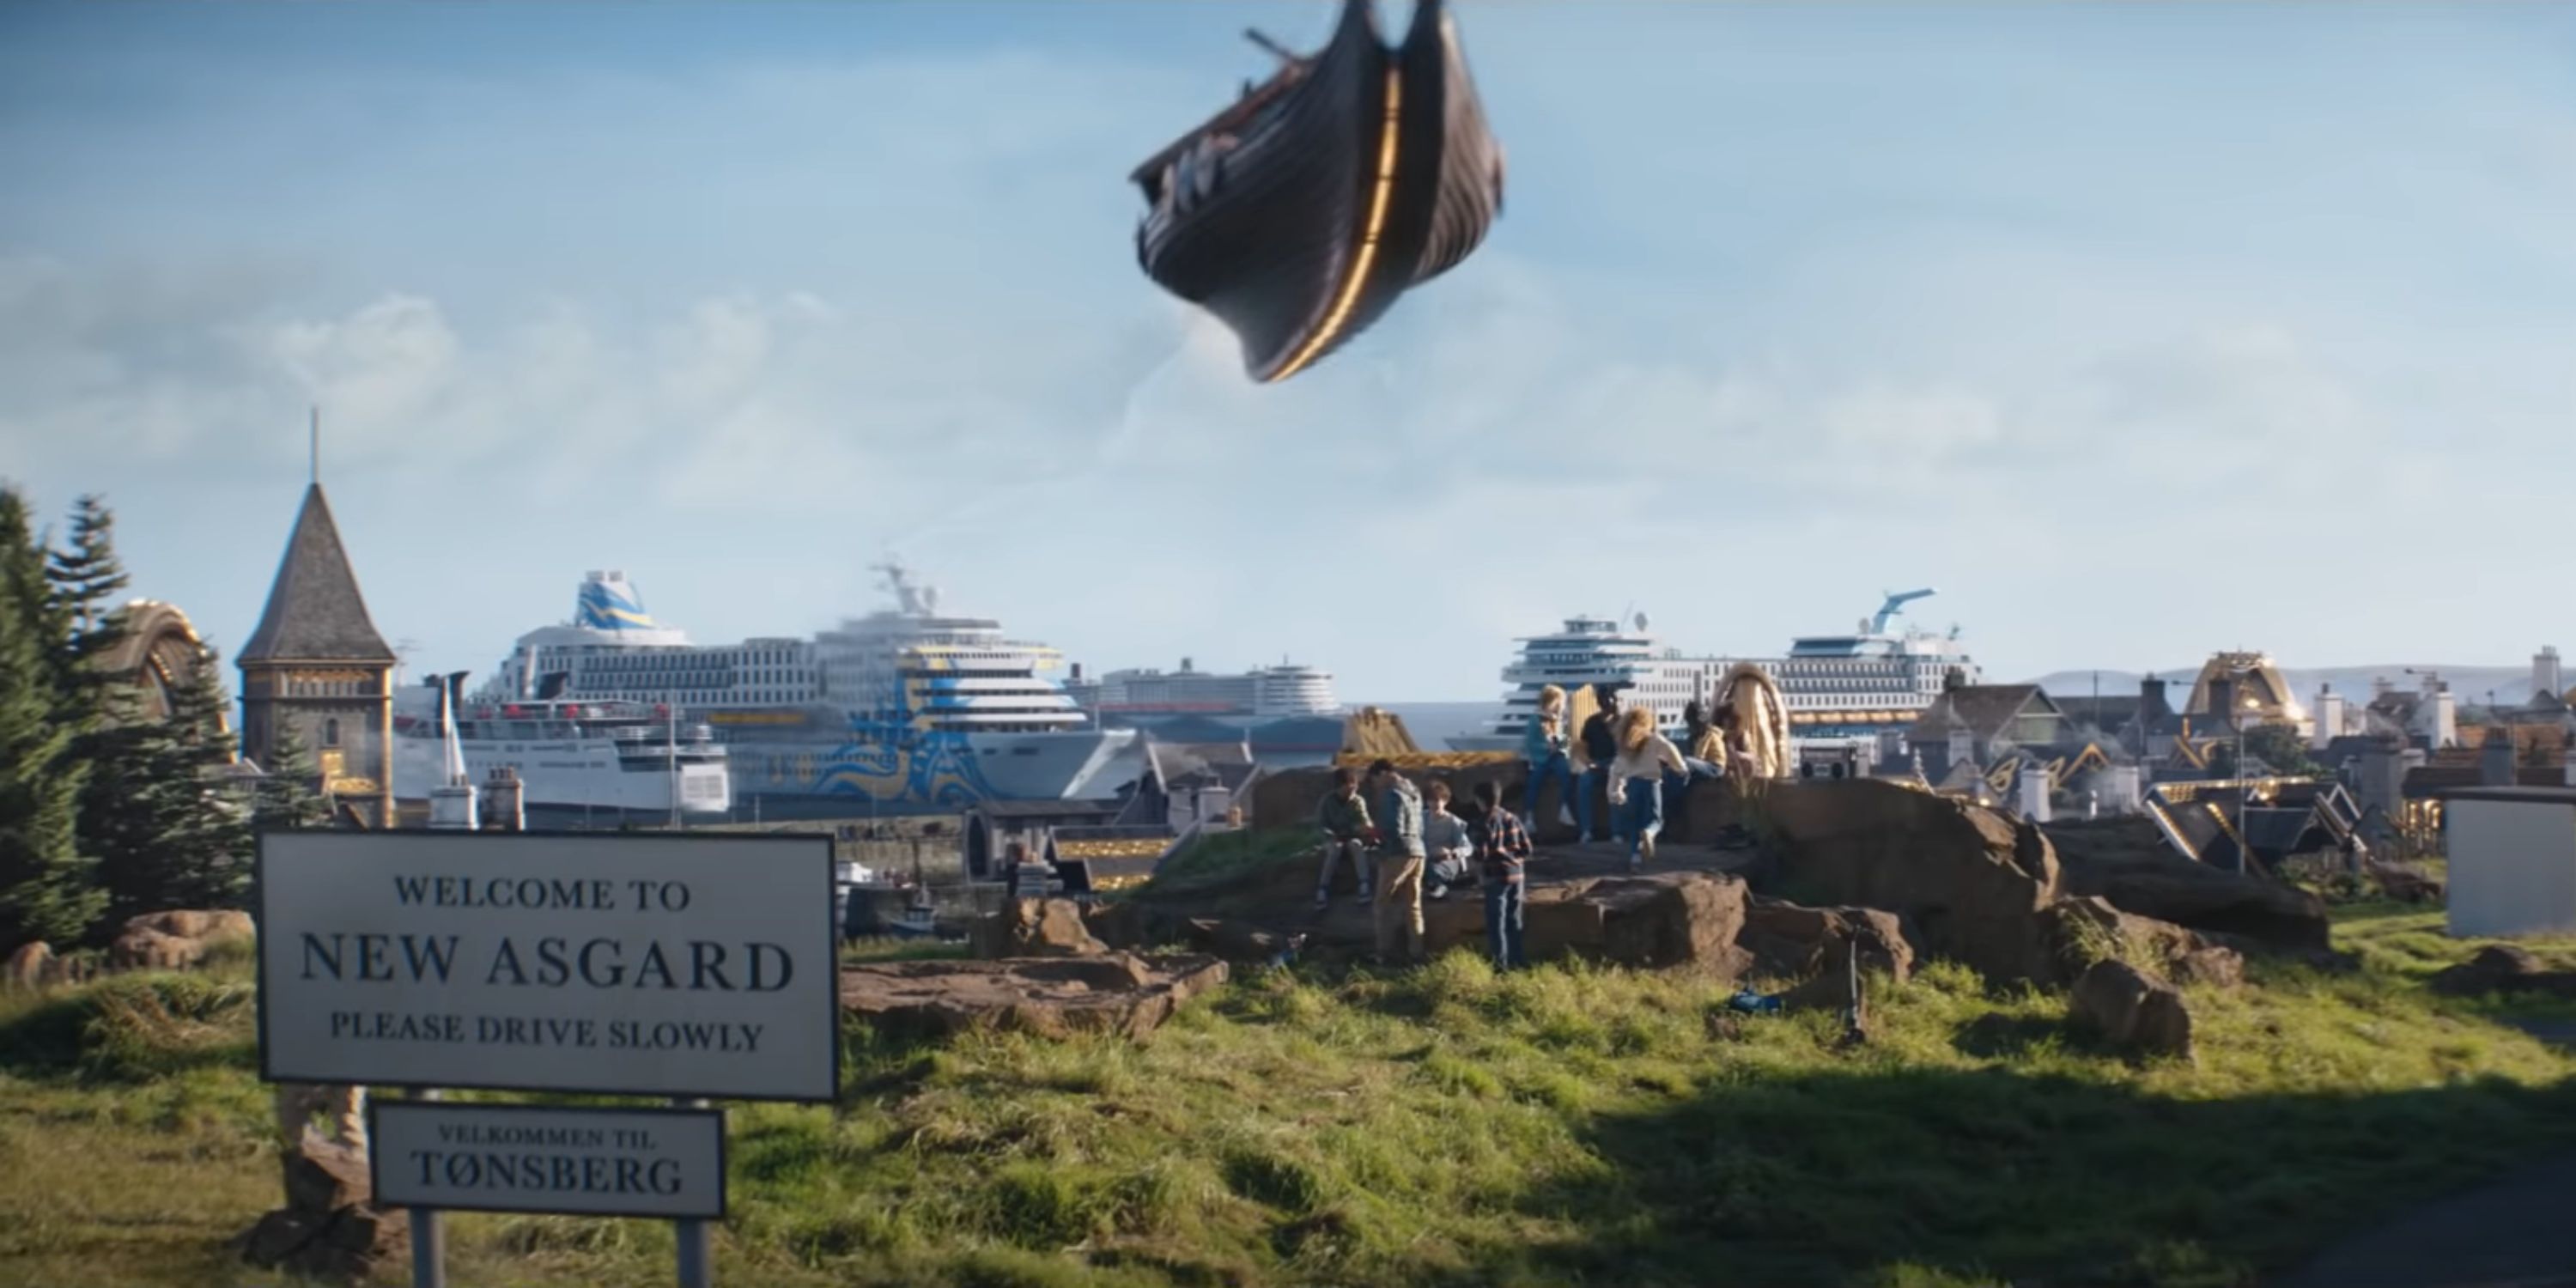 New Asgard Cruise Ships as shown in Thor: Love and Thunder trailer